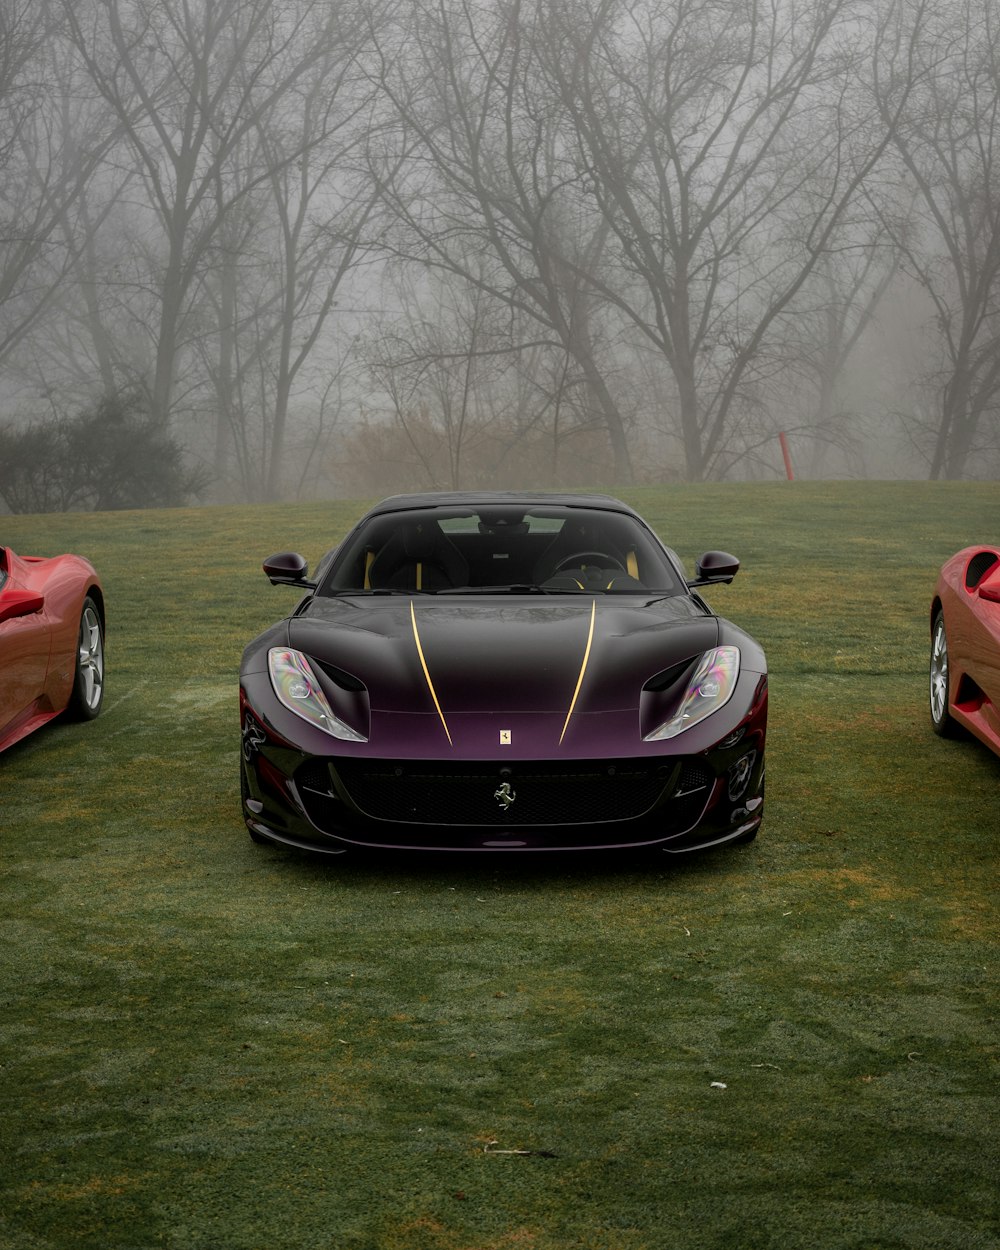 a purple sports car parked on grass